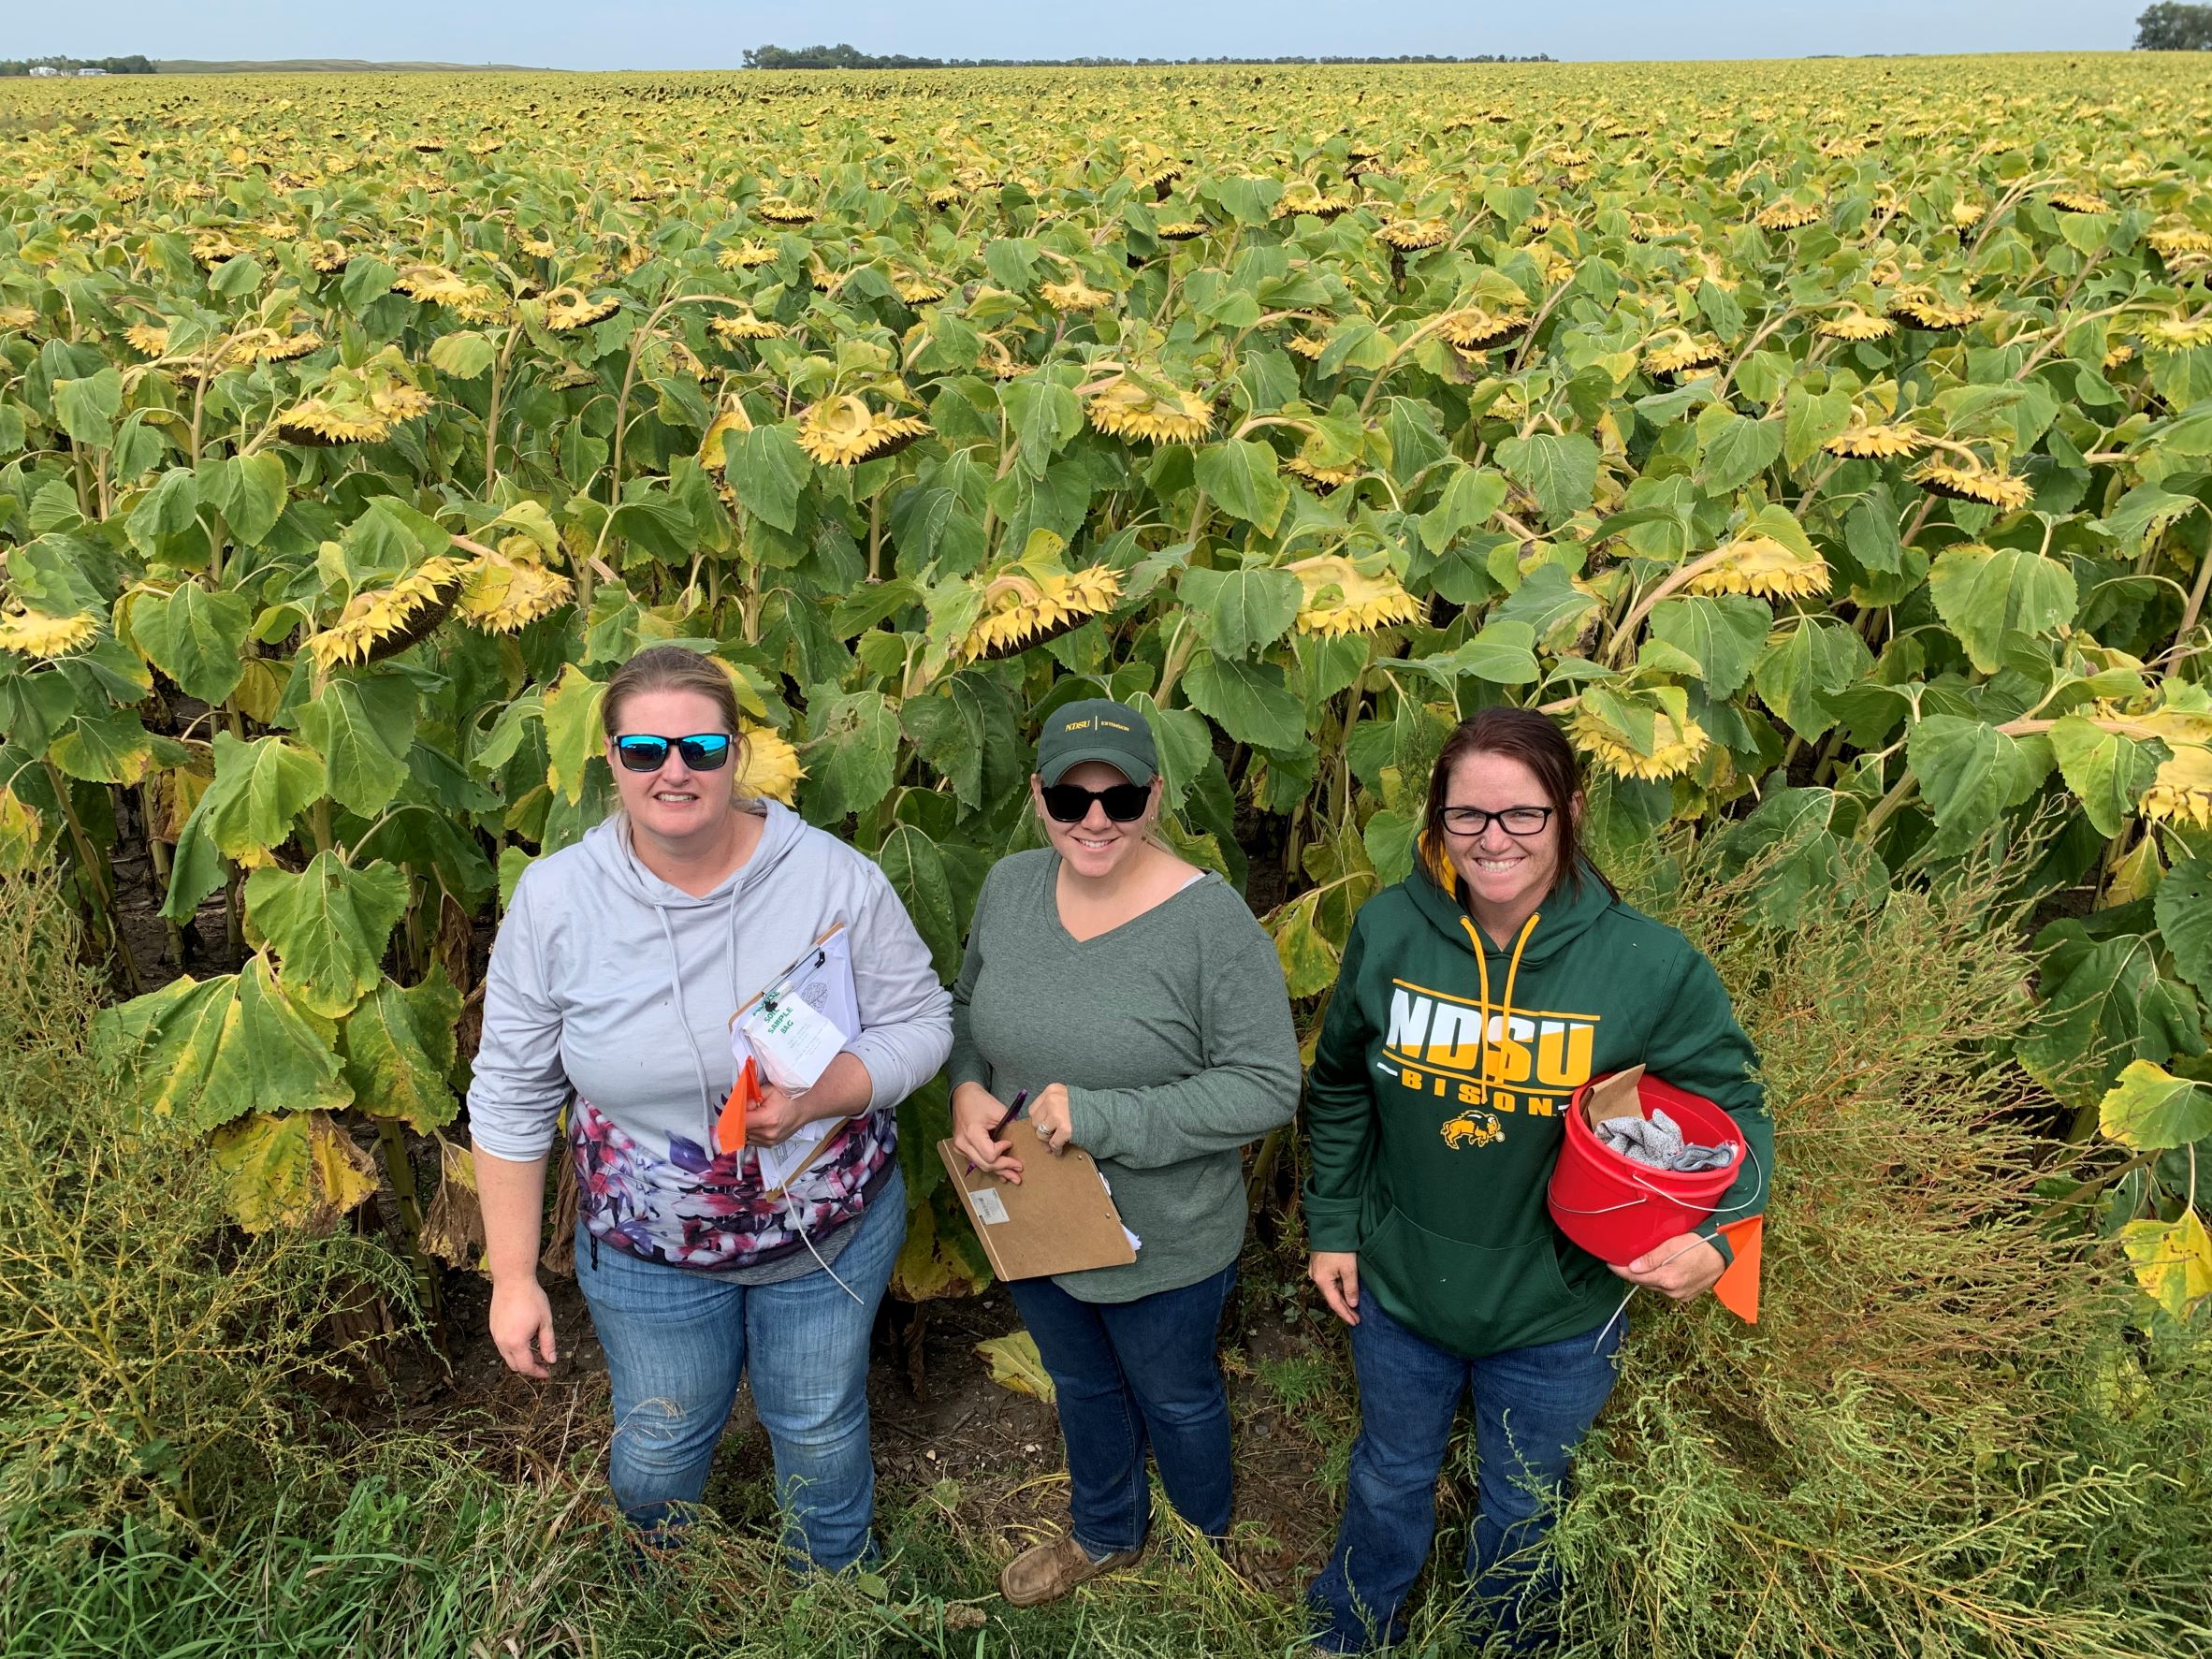 Three Extension agents standing at the edge of a sunflower field.